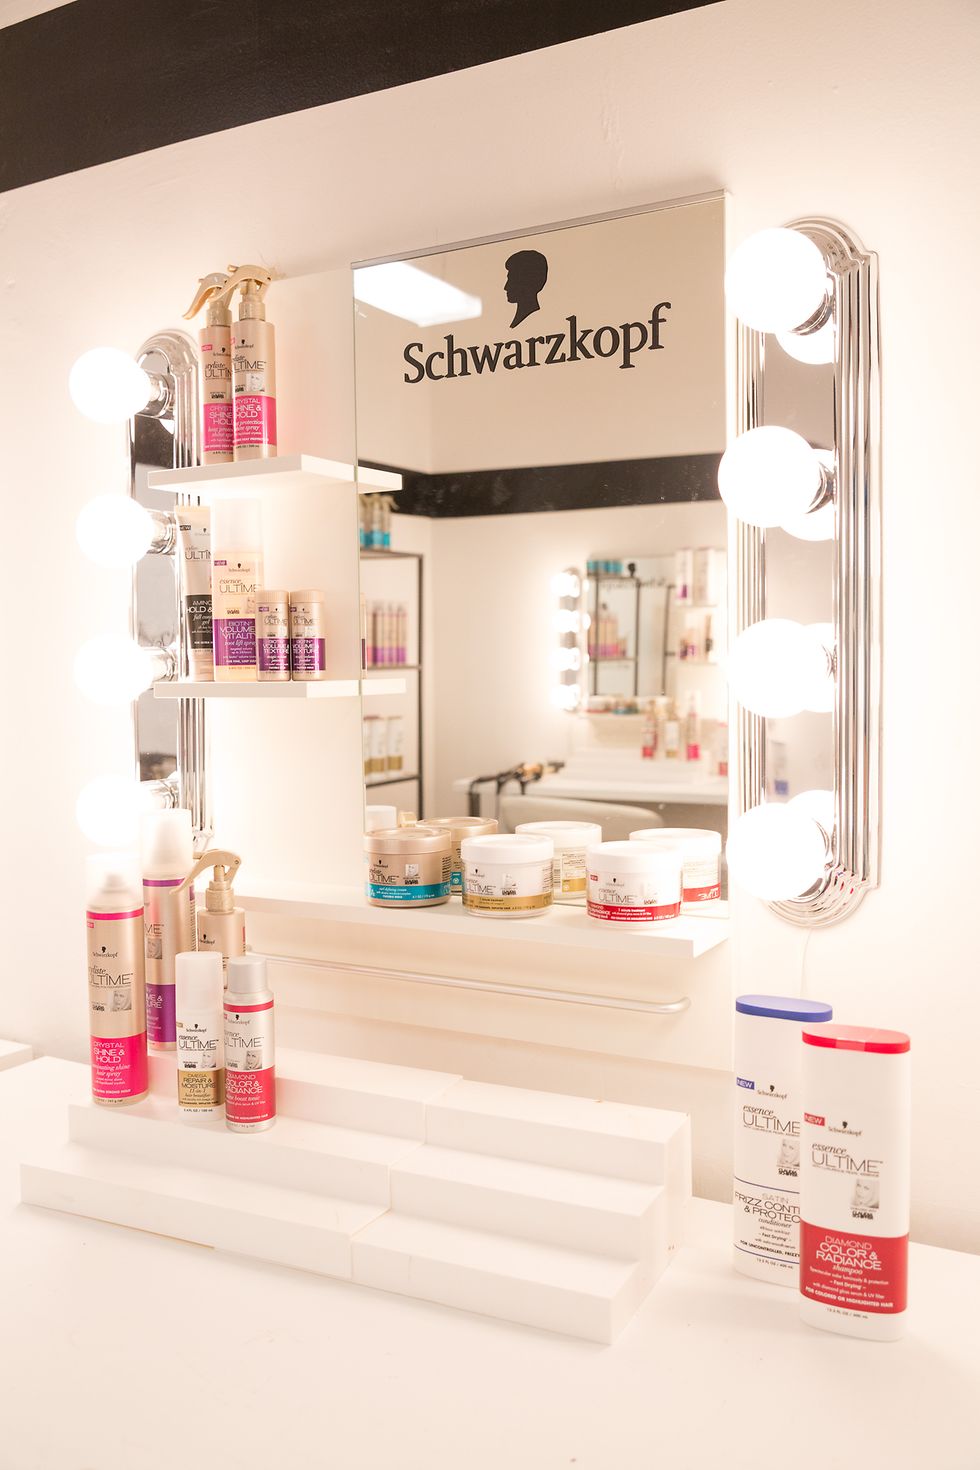 Schwarzkopf is the official salon sponsor of Project Runway All Stars.